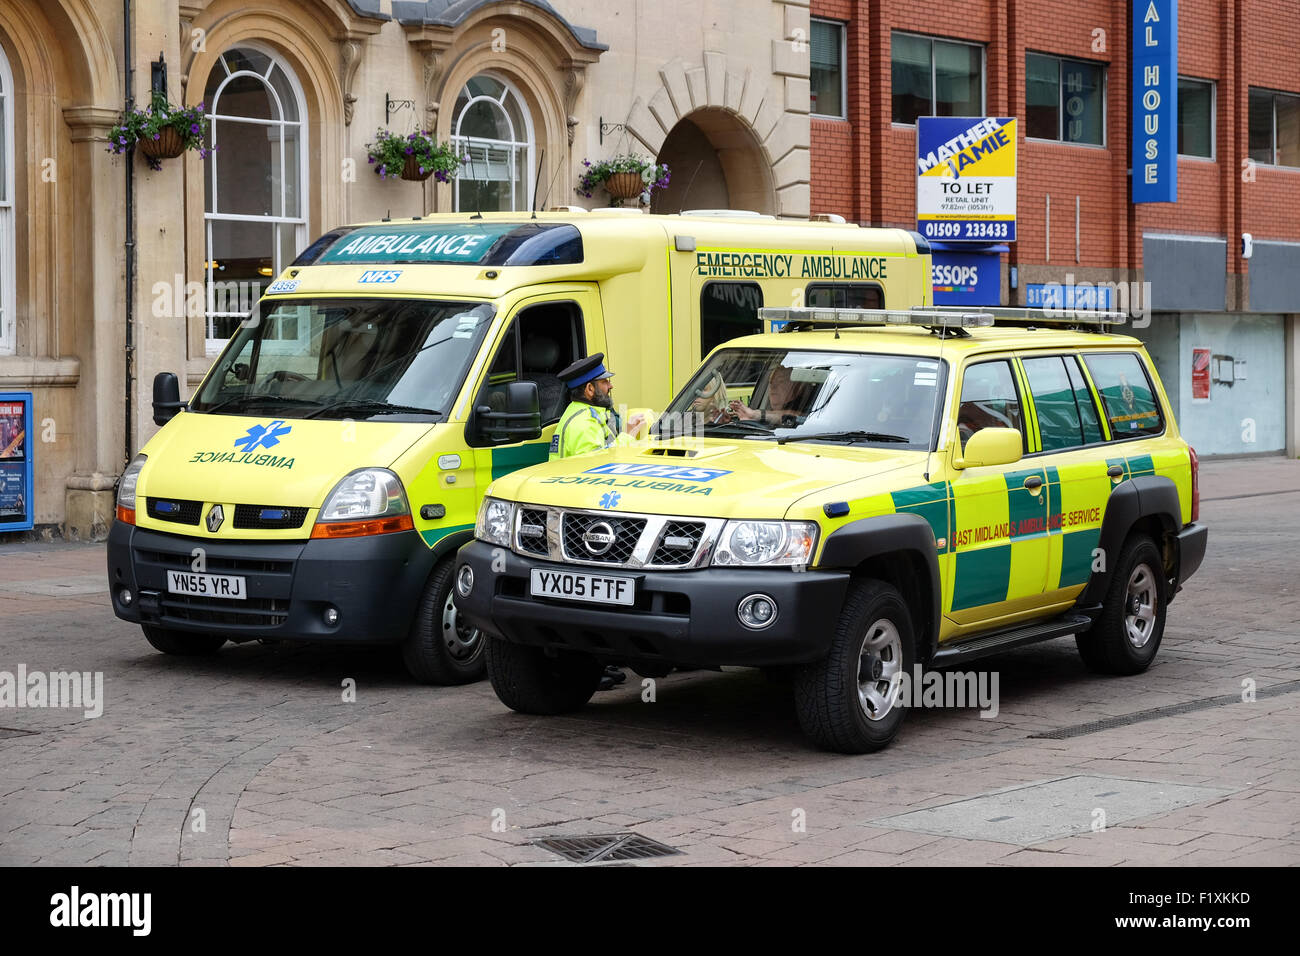 east midlands ambulance service in loughborough Stock Photo